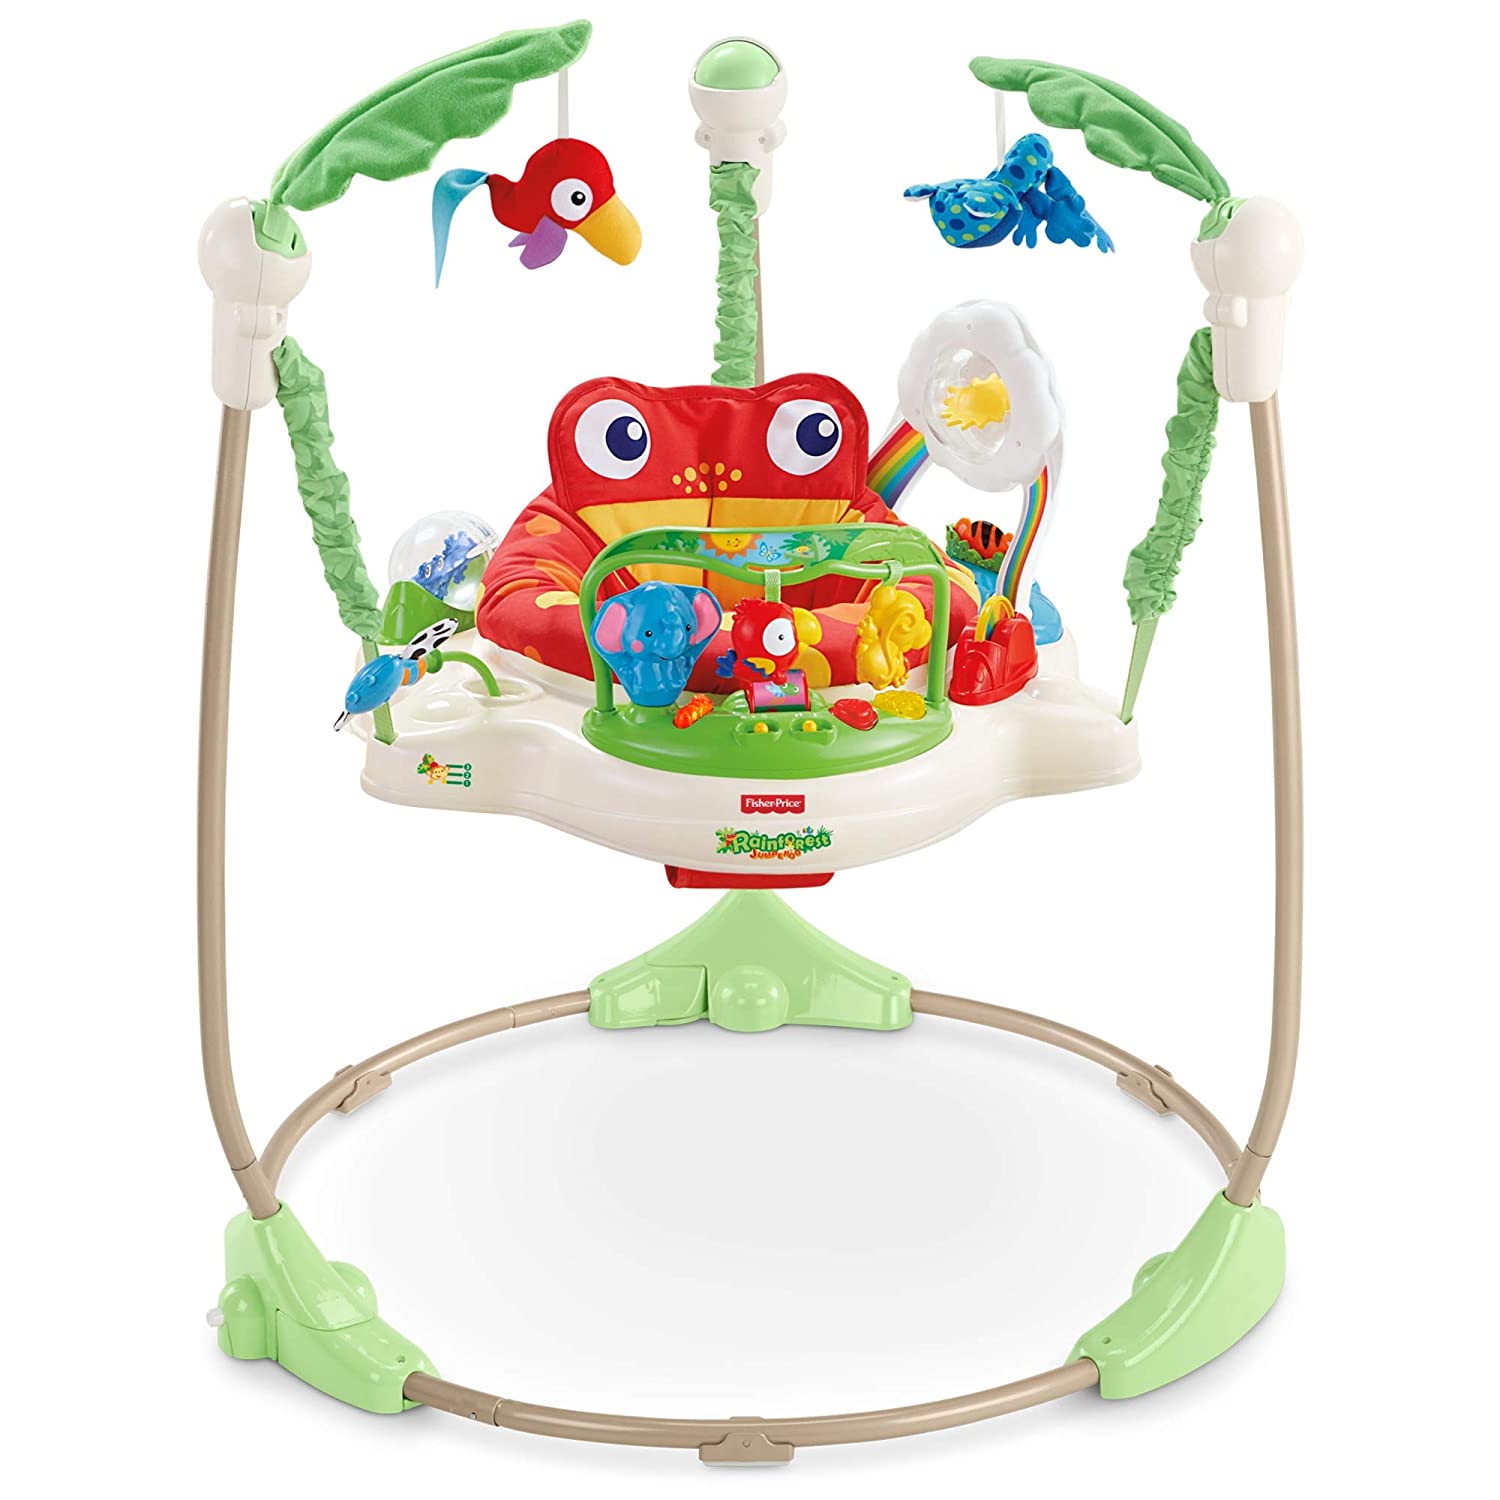 7 Best Fisher Price Jumperoo Reviews in 2023 1